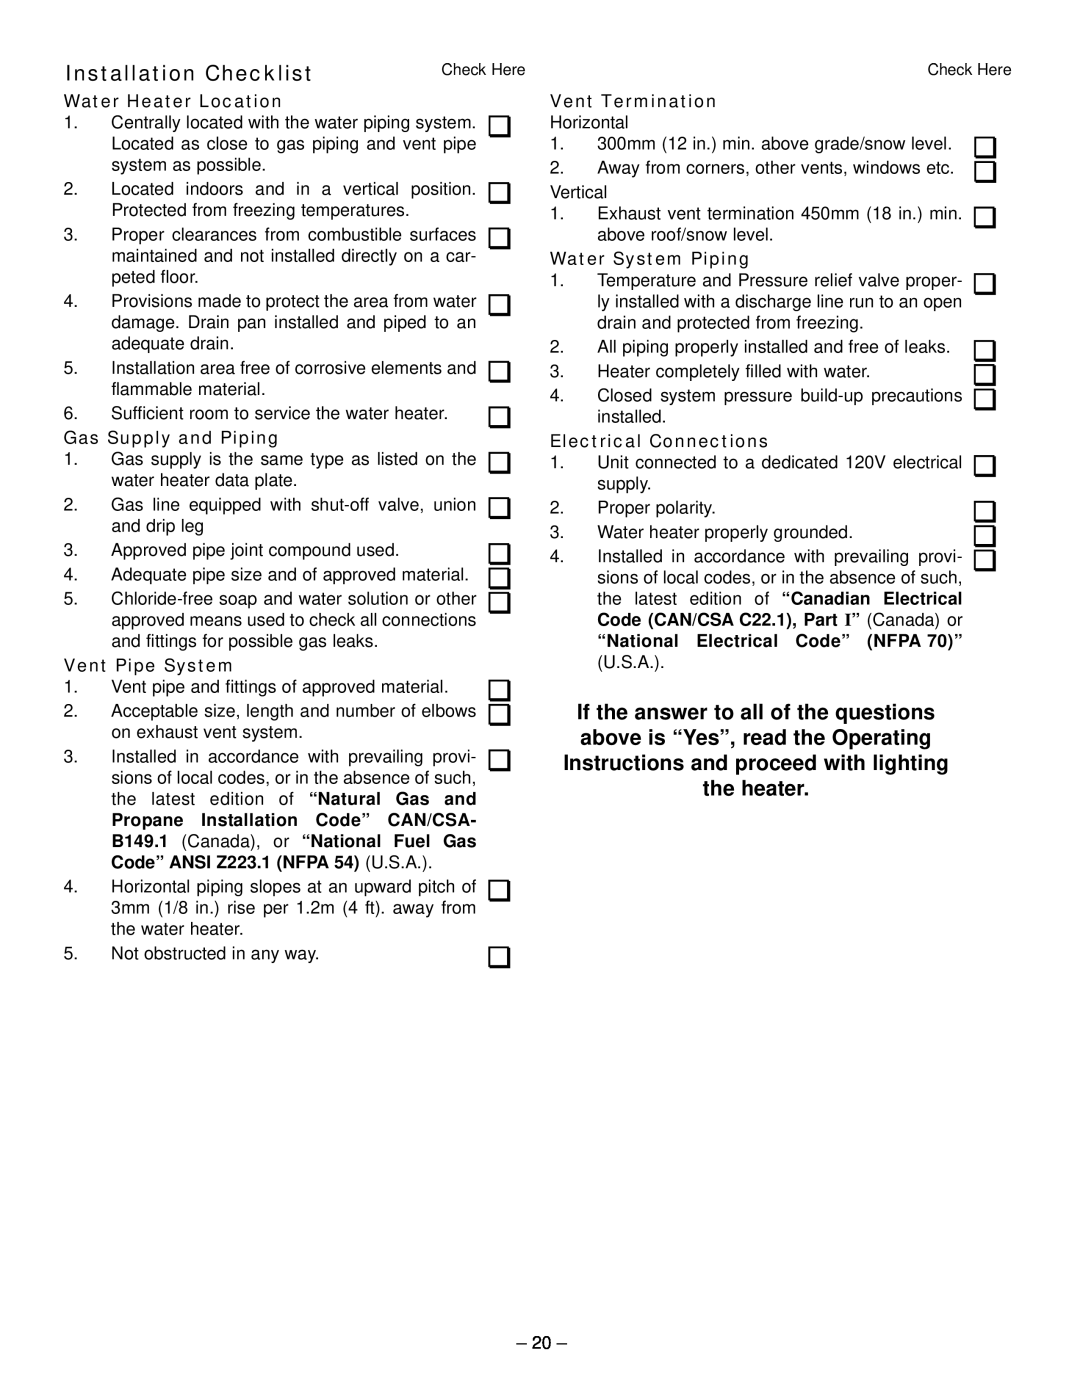 GSW 319594-000 Installation Checklist, Water Heater Location, Gas Supply and Piping, Vent Pipe System, Vent Termination 